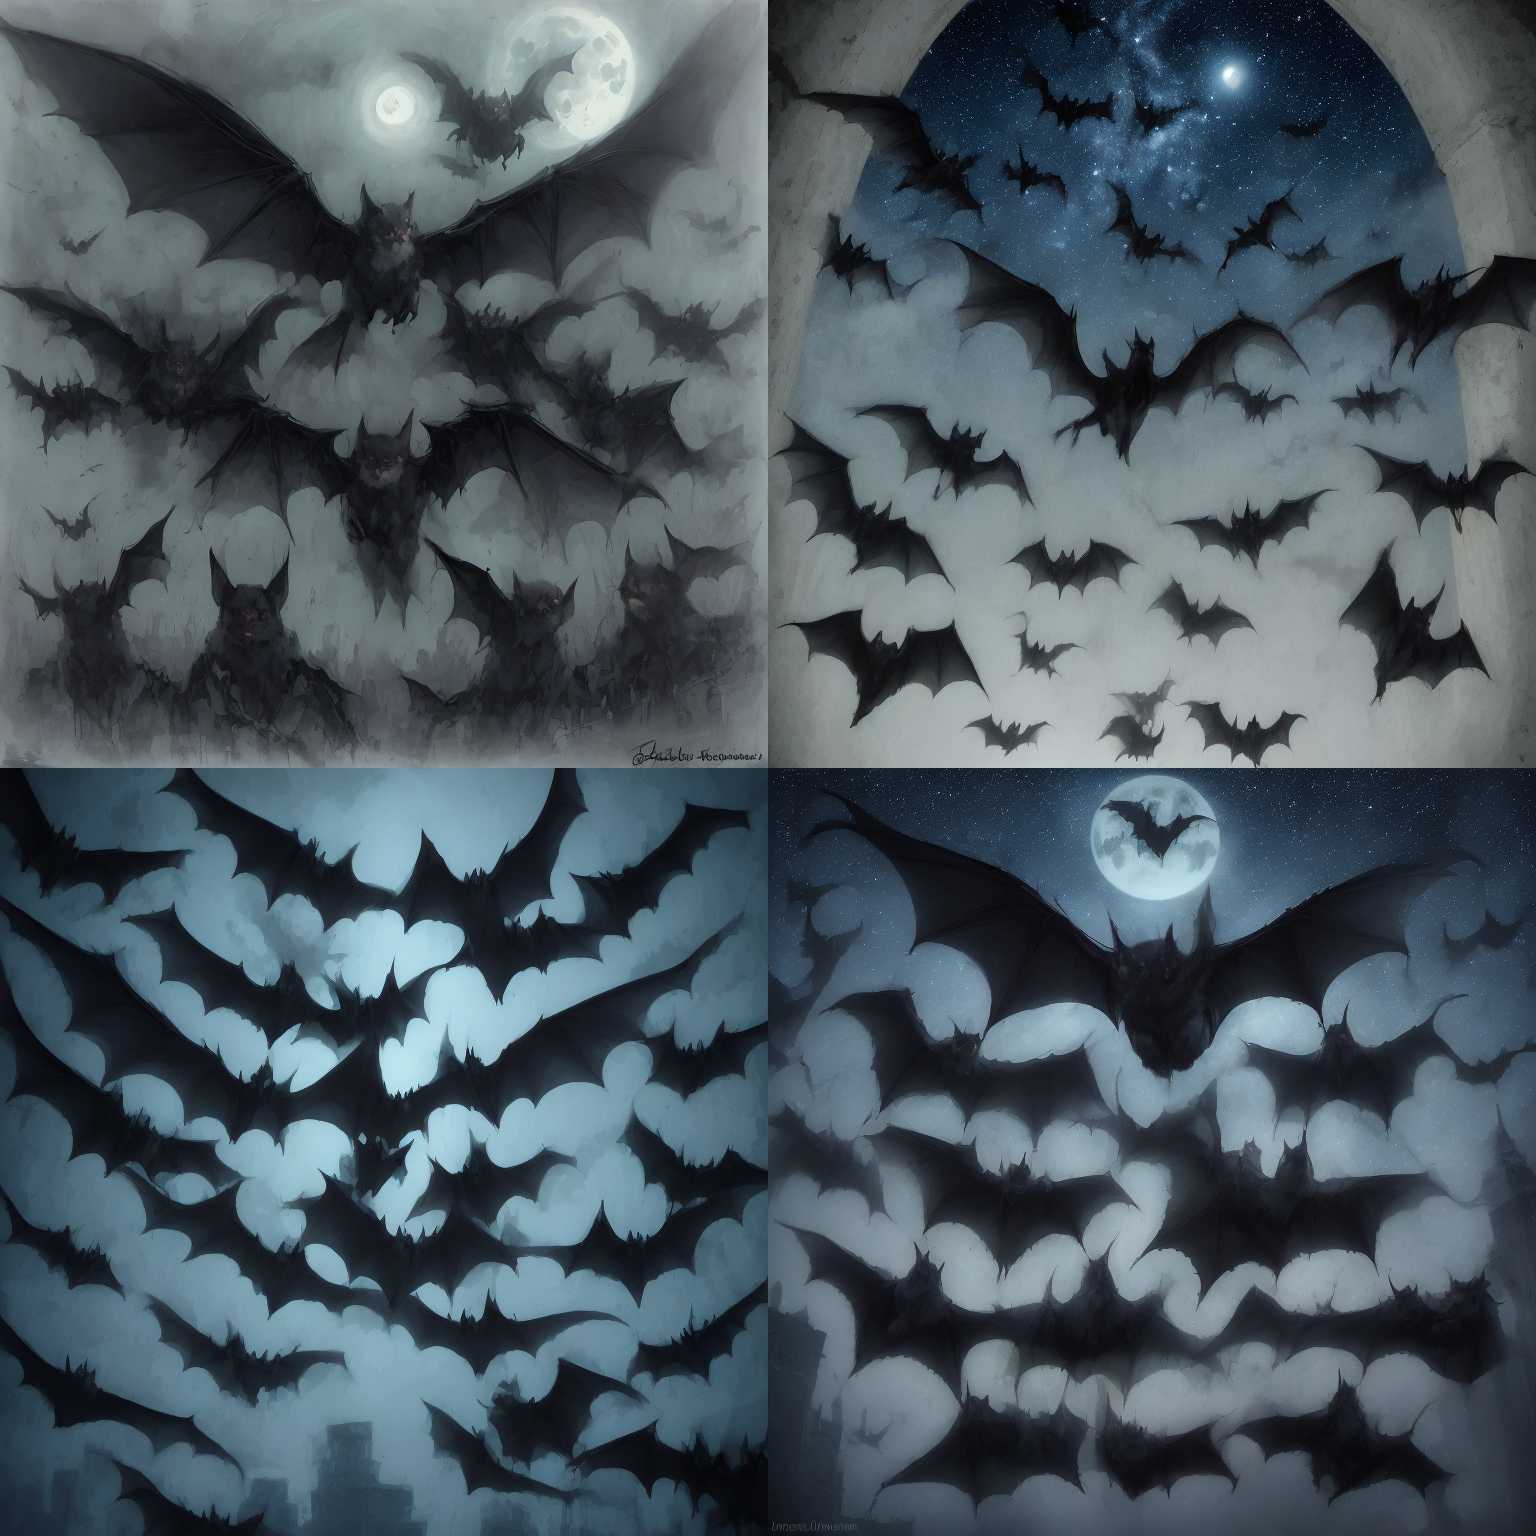 Bats during the night